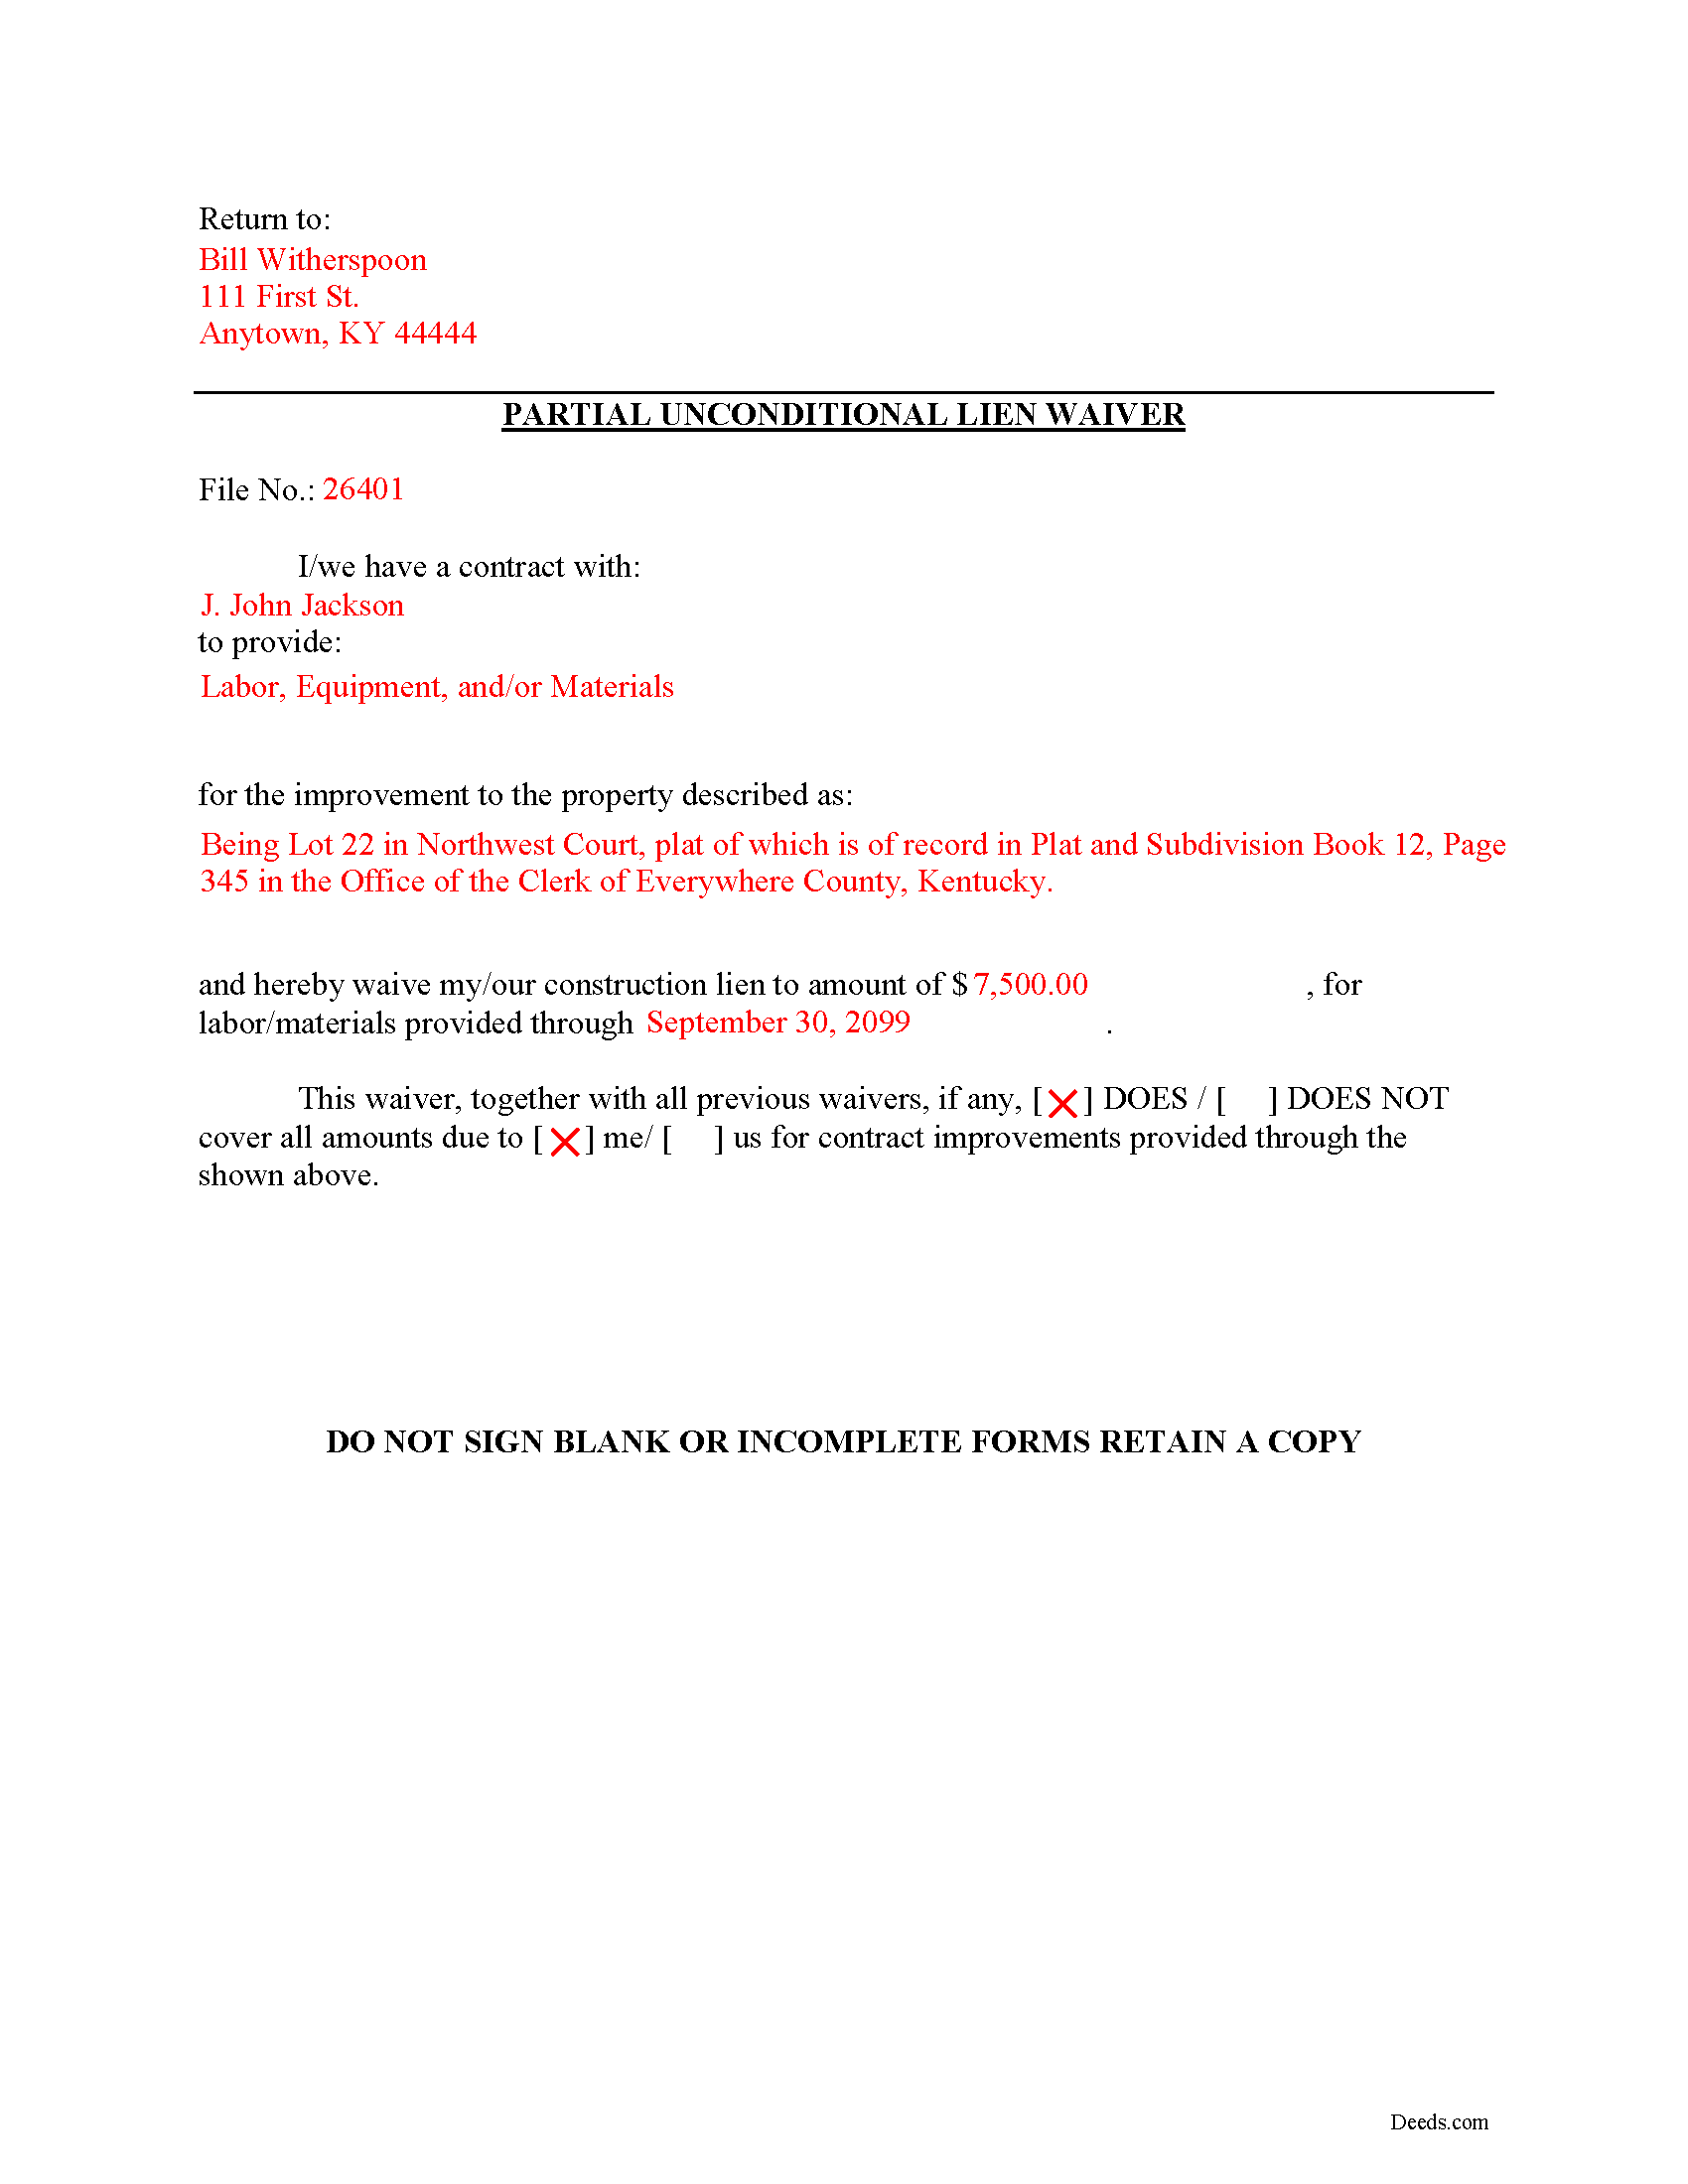 Completed Example of the Partial Unconditional Lien Waiver Document